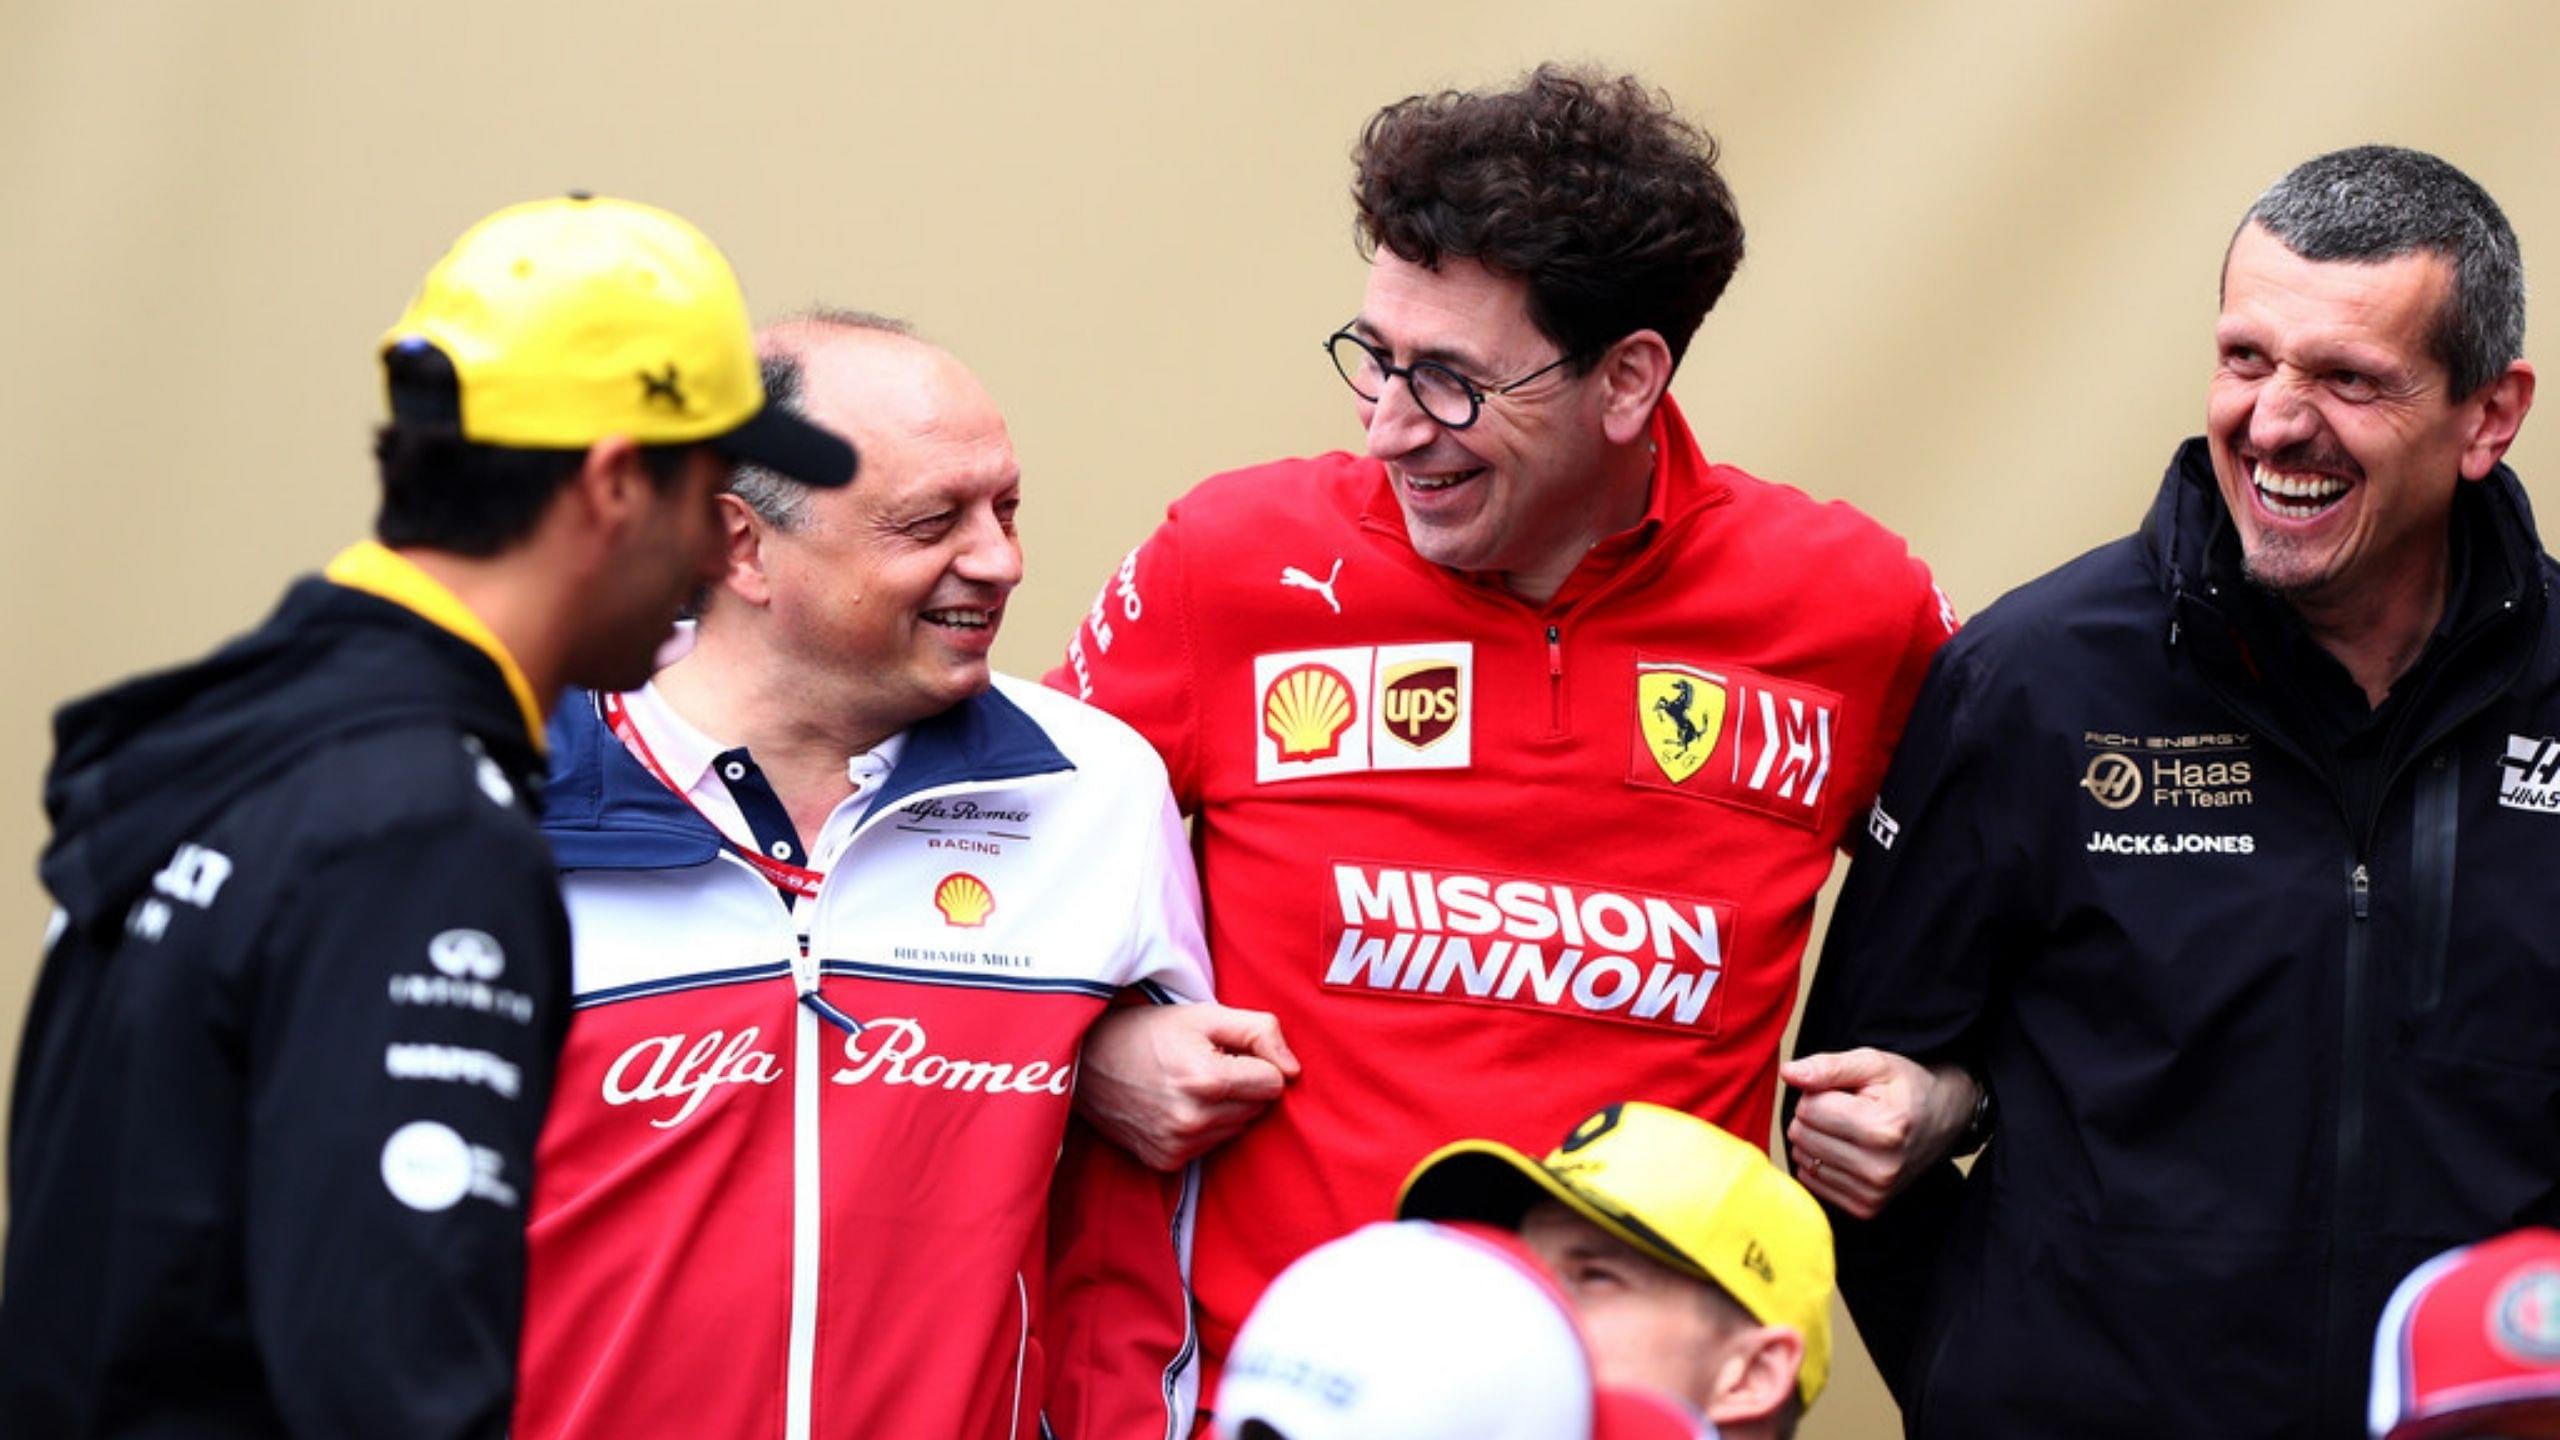 "The presence of client teams seriously helps us out" - Ferrari boss Mattia Binotto grateful to Haas for impending debut of Mick Schumacher